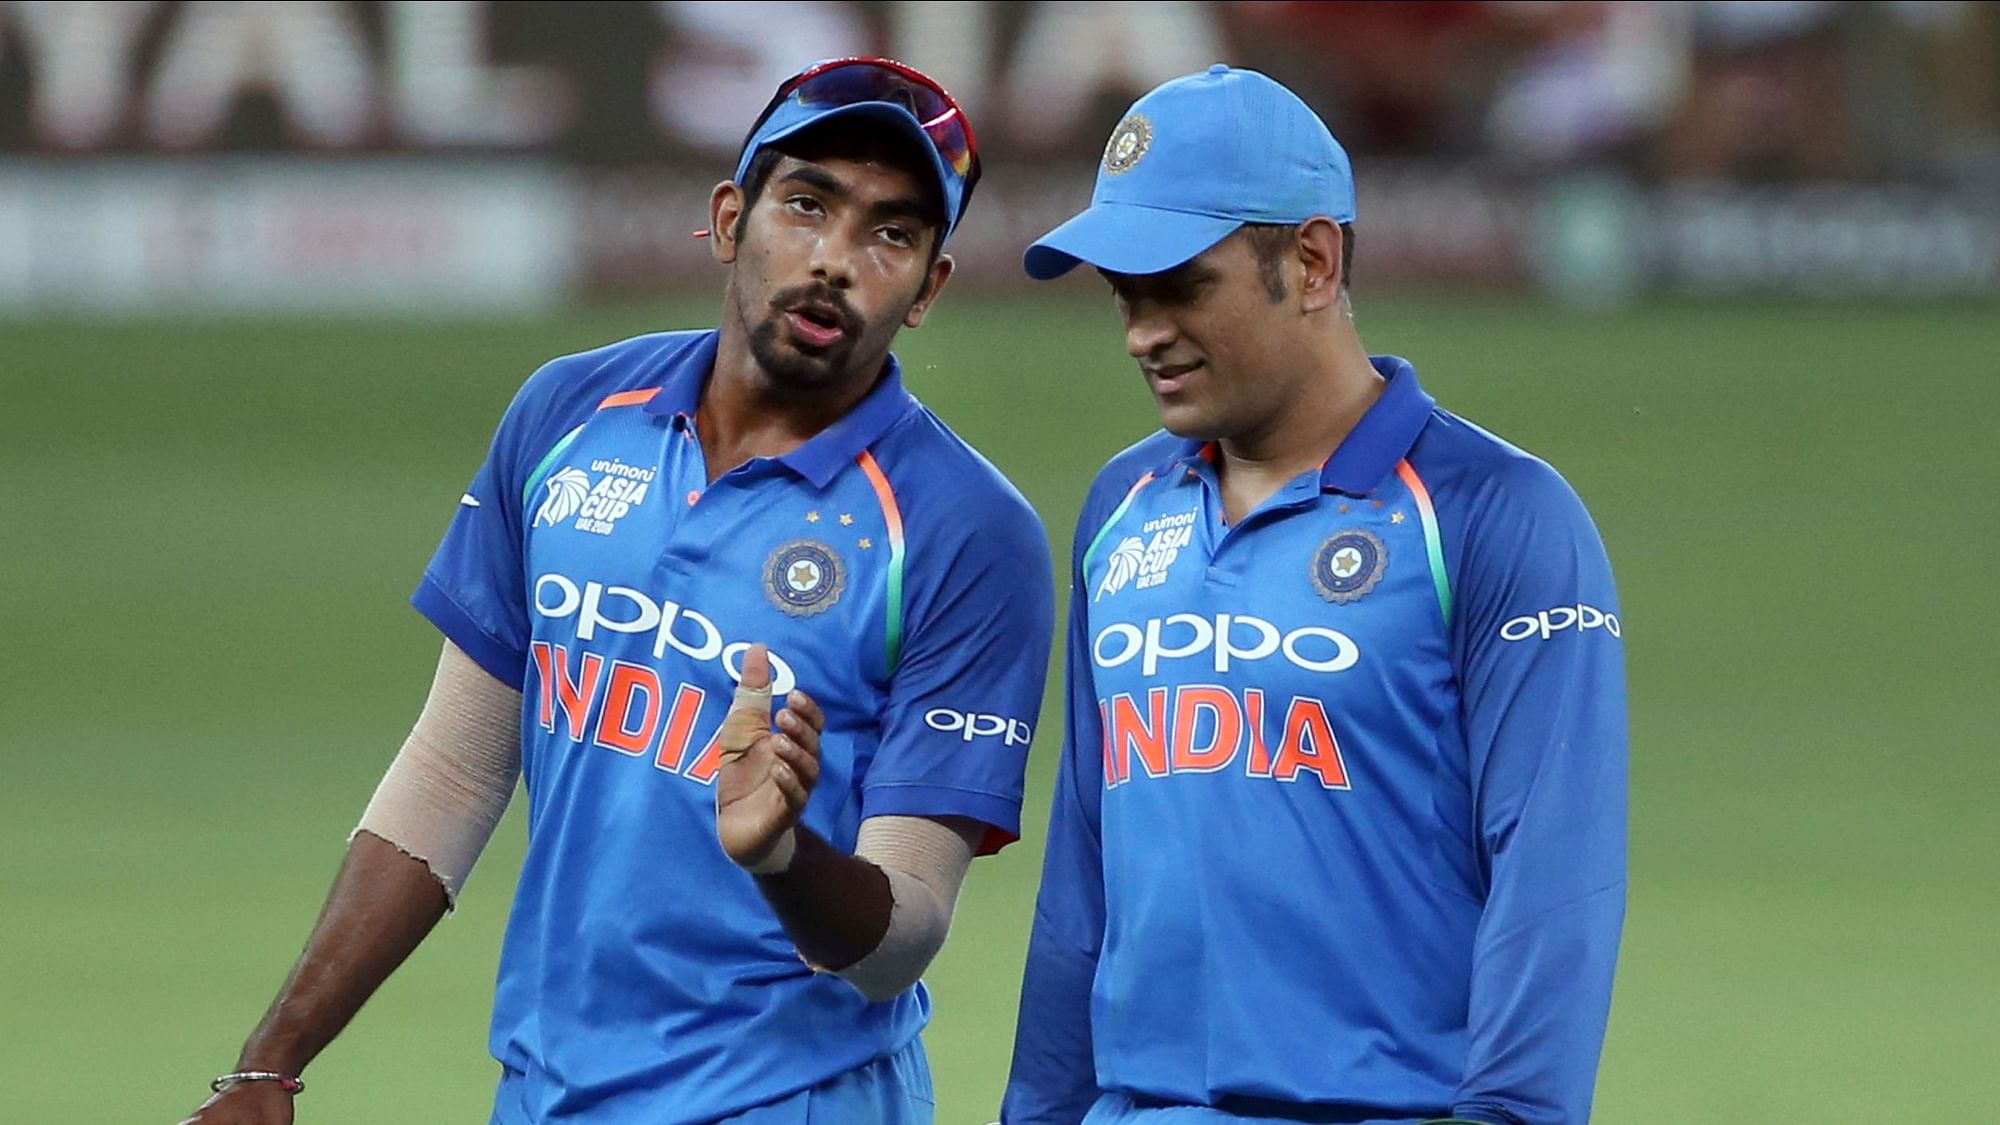 MS Dhoni and Jasprit Bumrah do not feature in the 15-man squad.